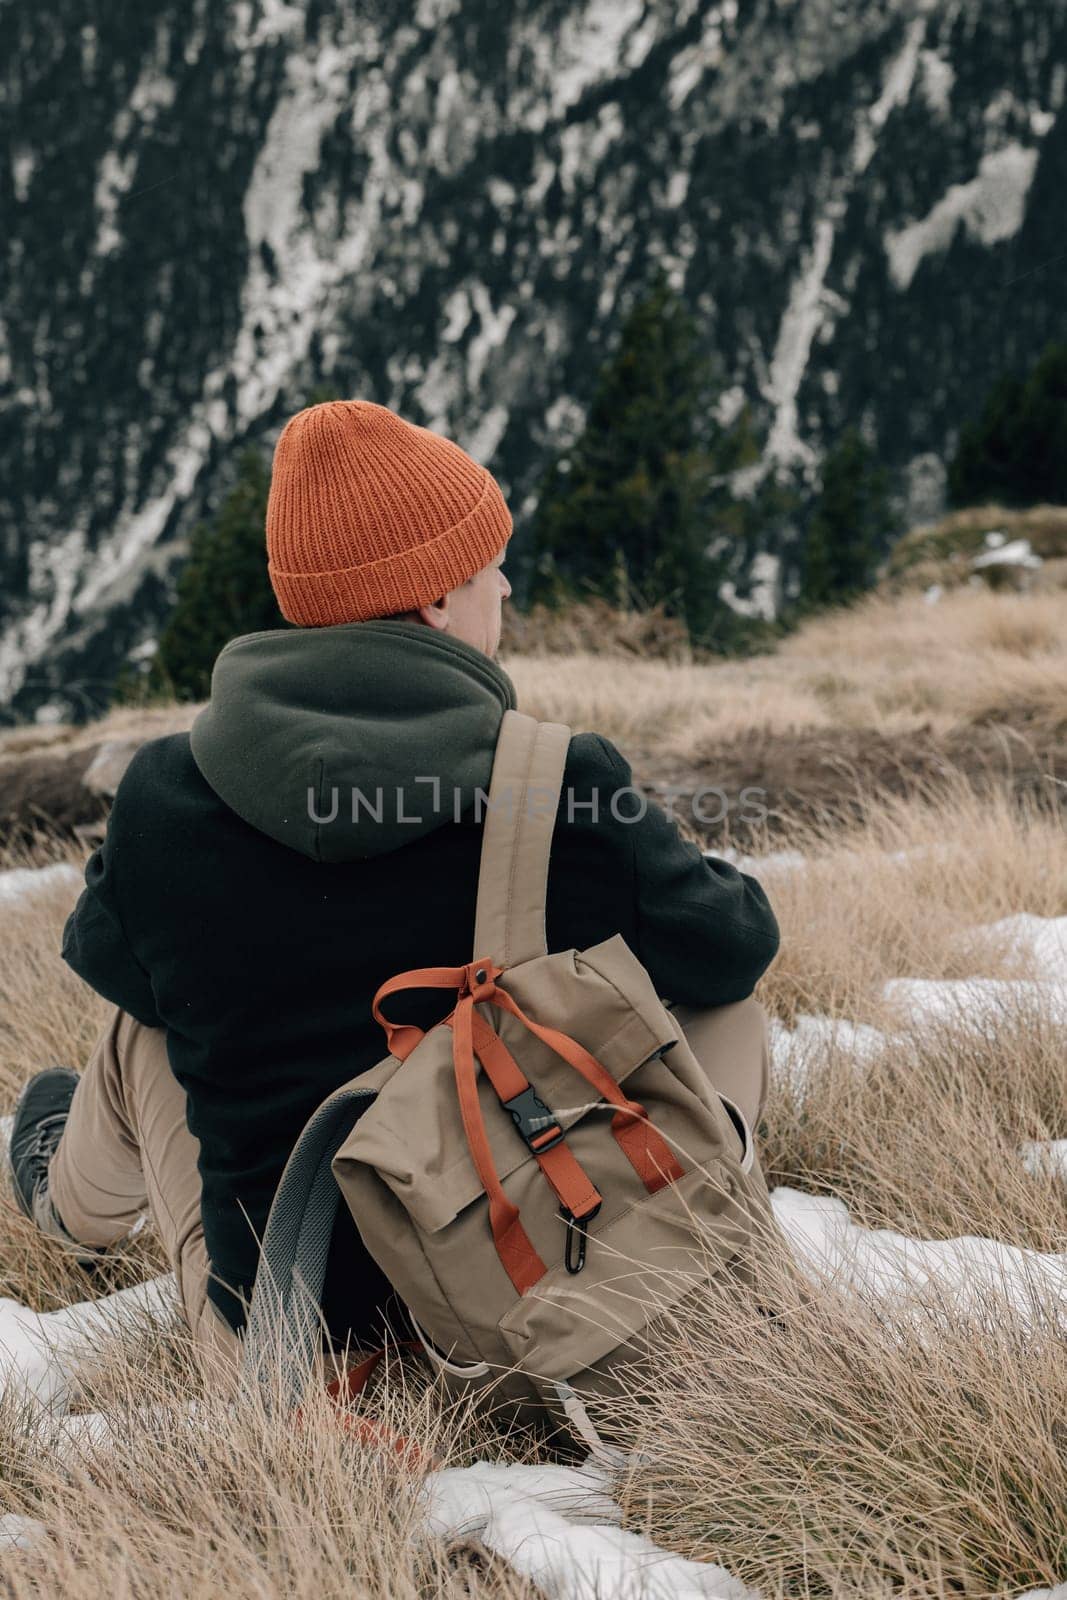 A solitary figure takes a moment to rest and admire the mountain view, surrounded by a snowy landscape.